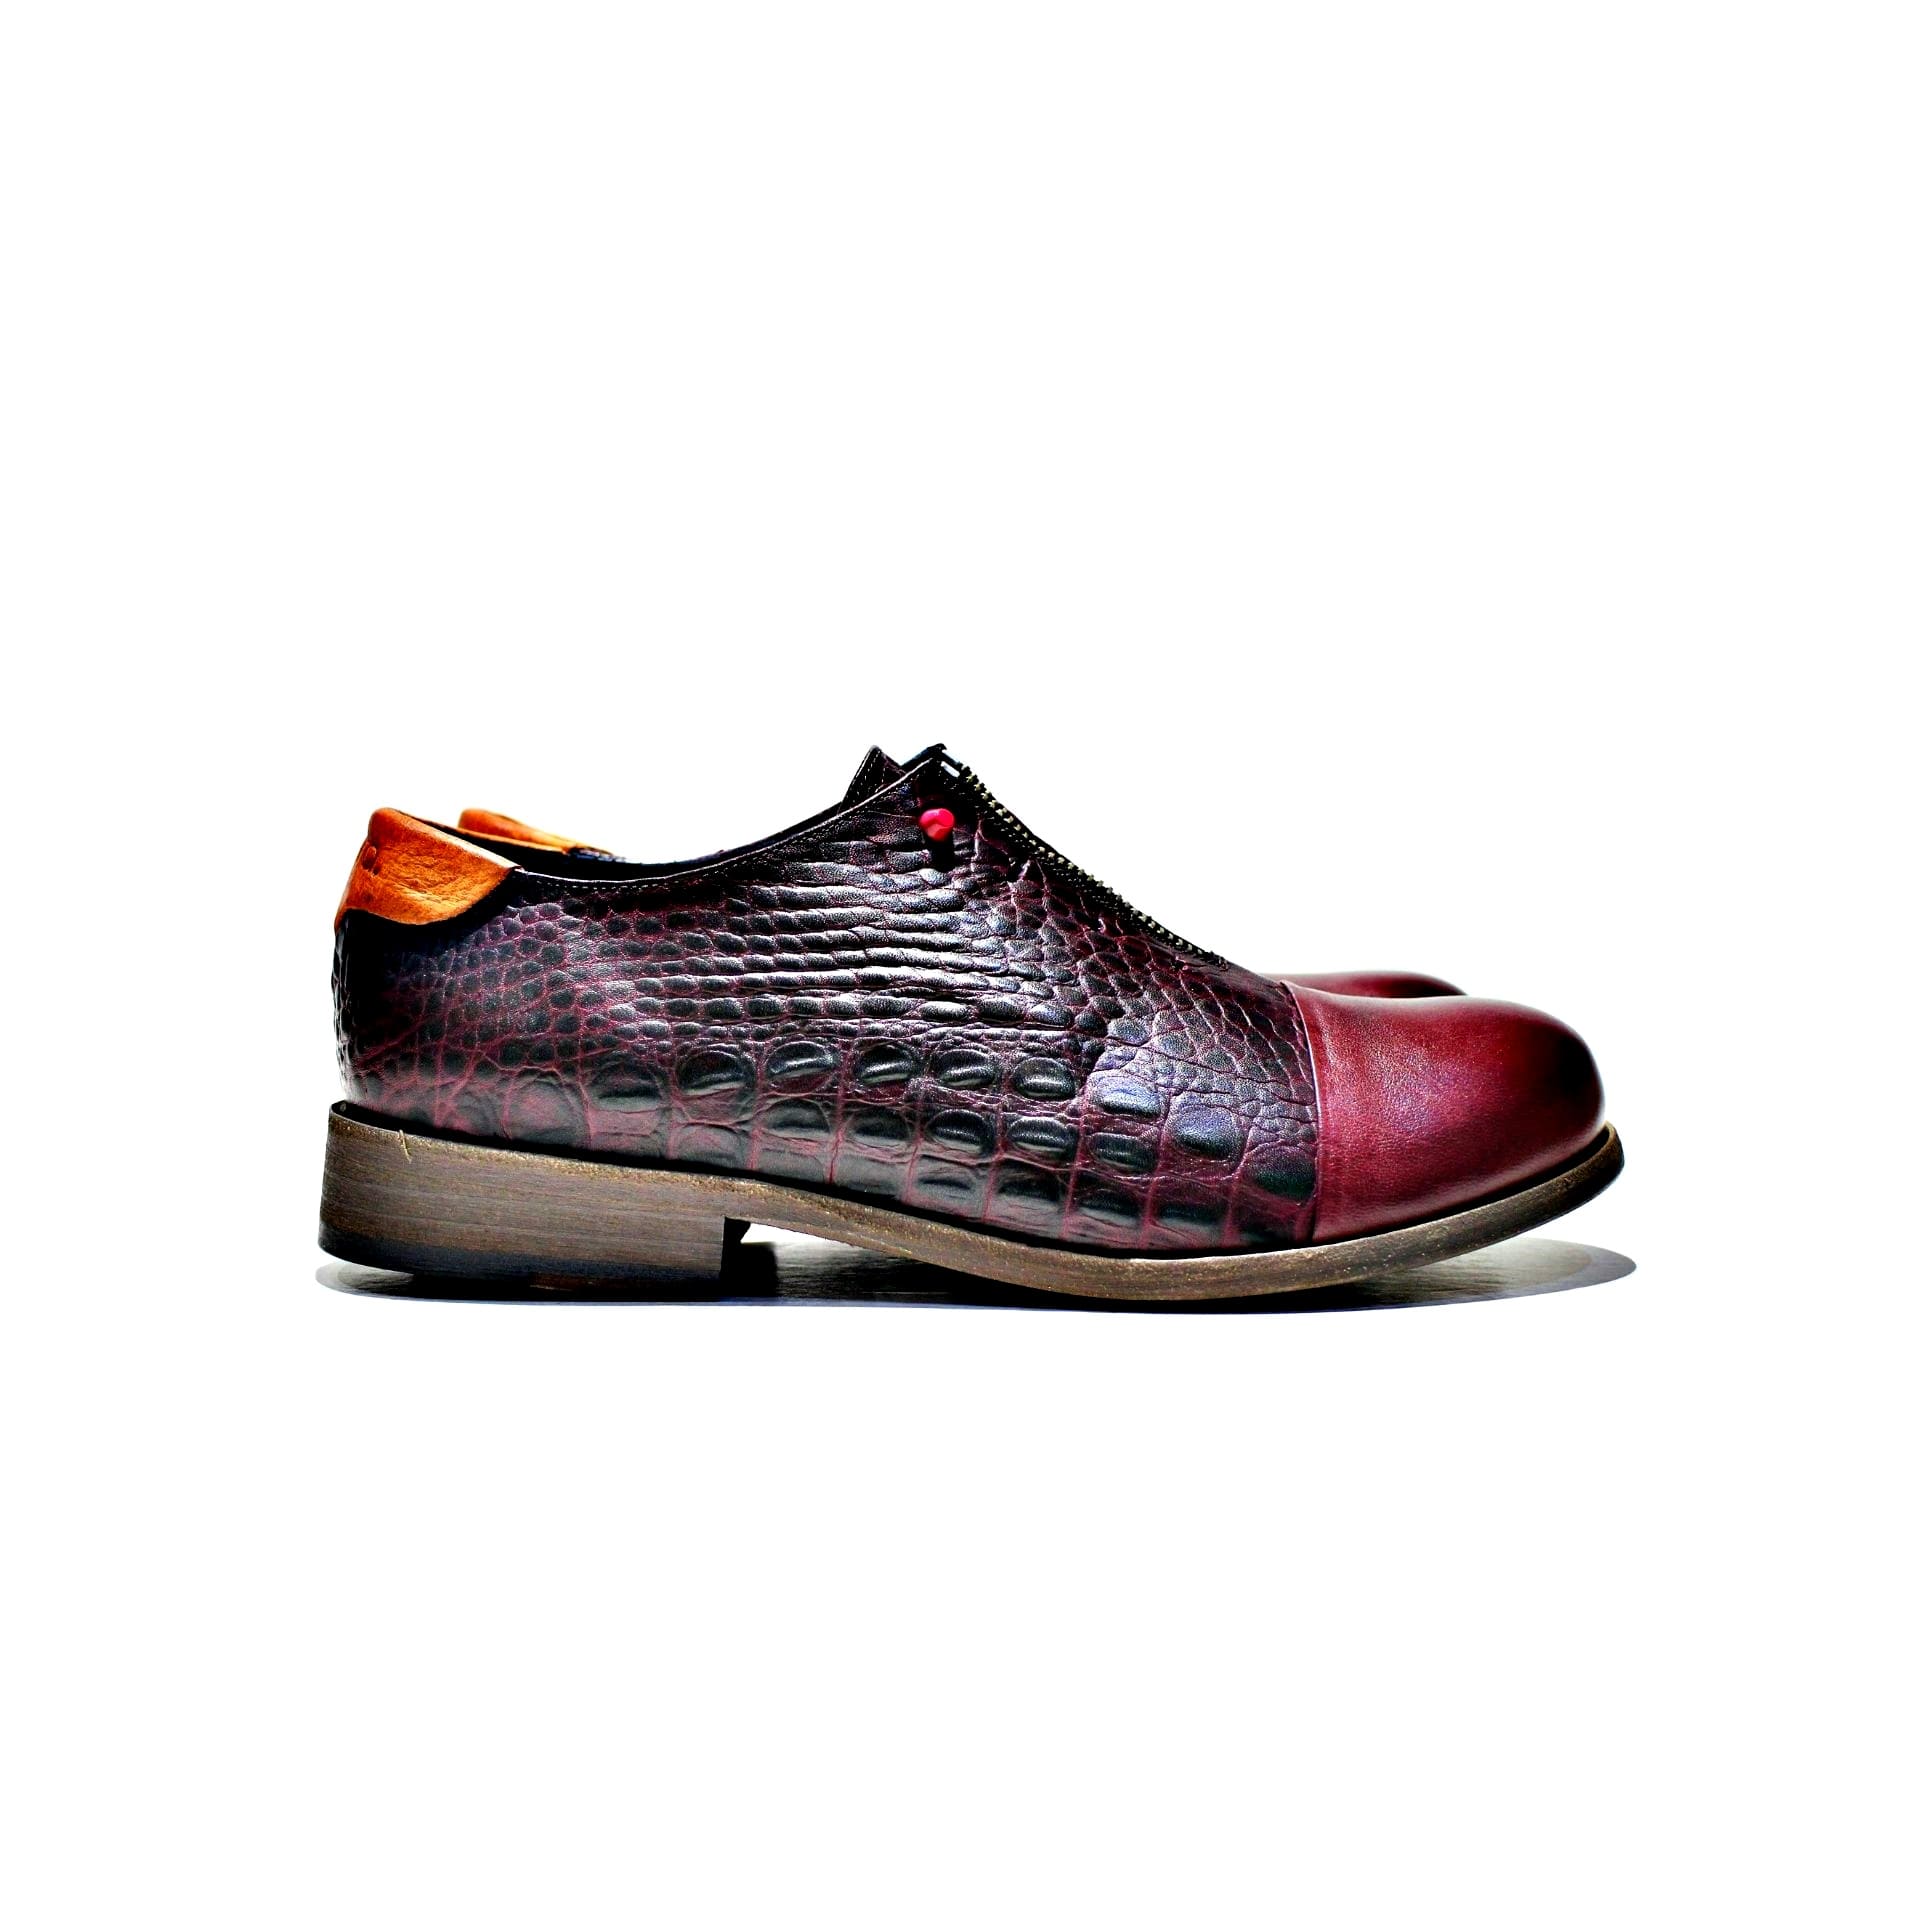 Shoe all composed of leather, with an exclusive design. Handmade in Portugal. “Walk with Pintta”